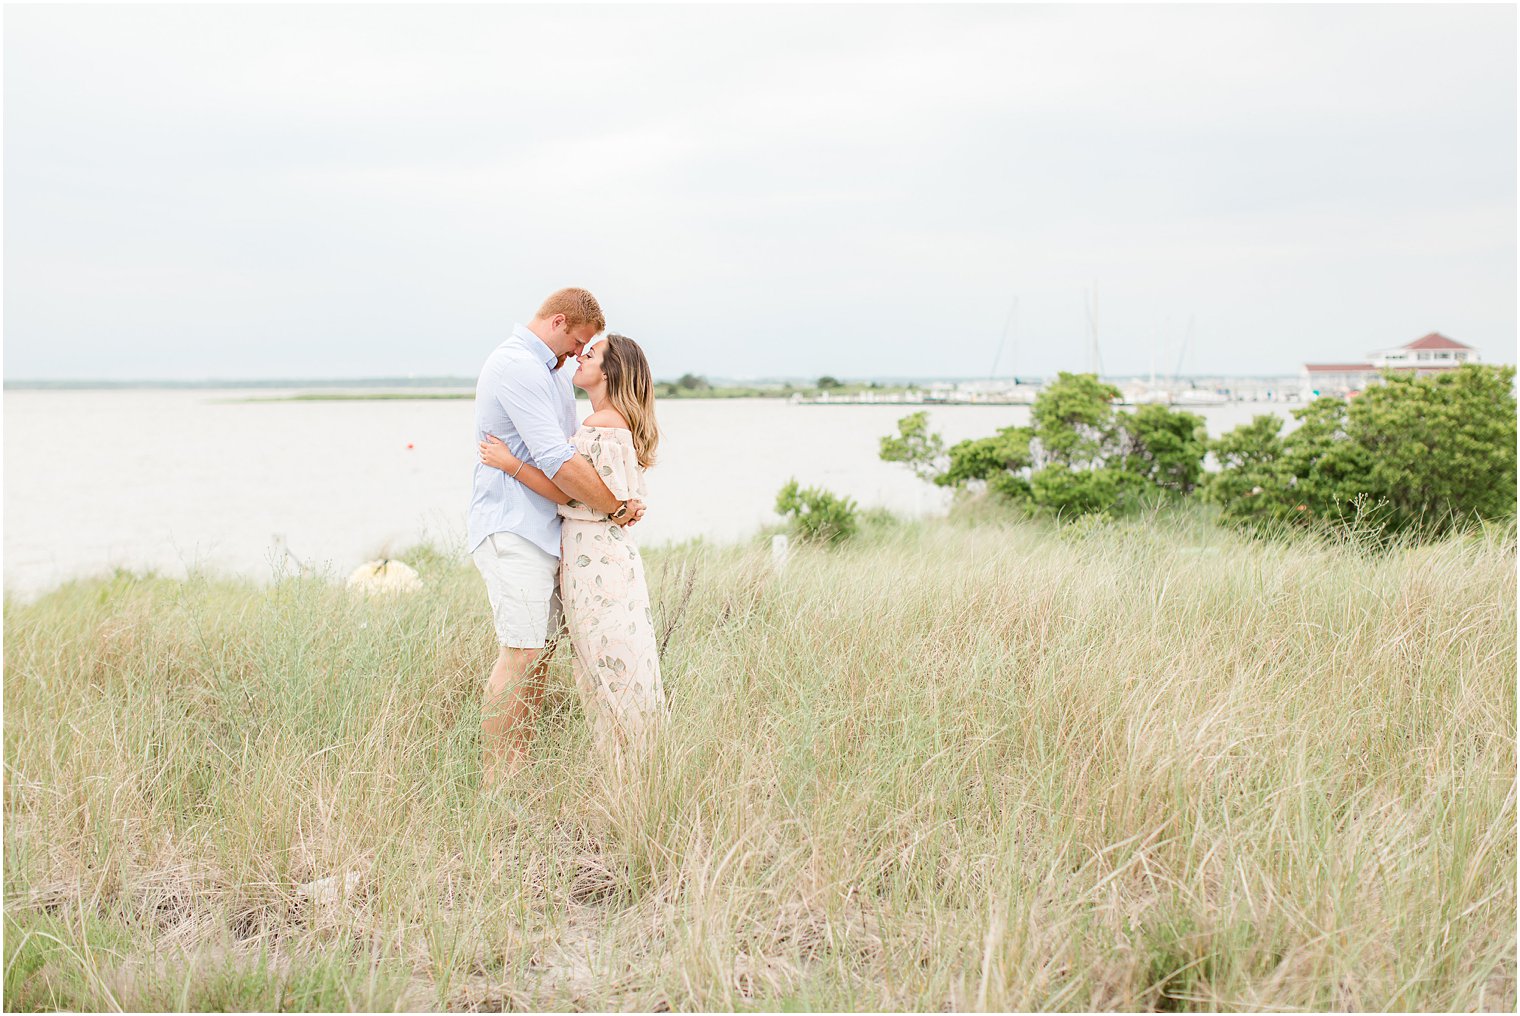 romantic engagement photo with tall grasses